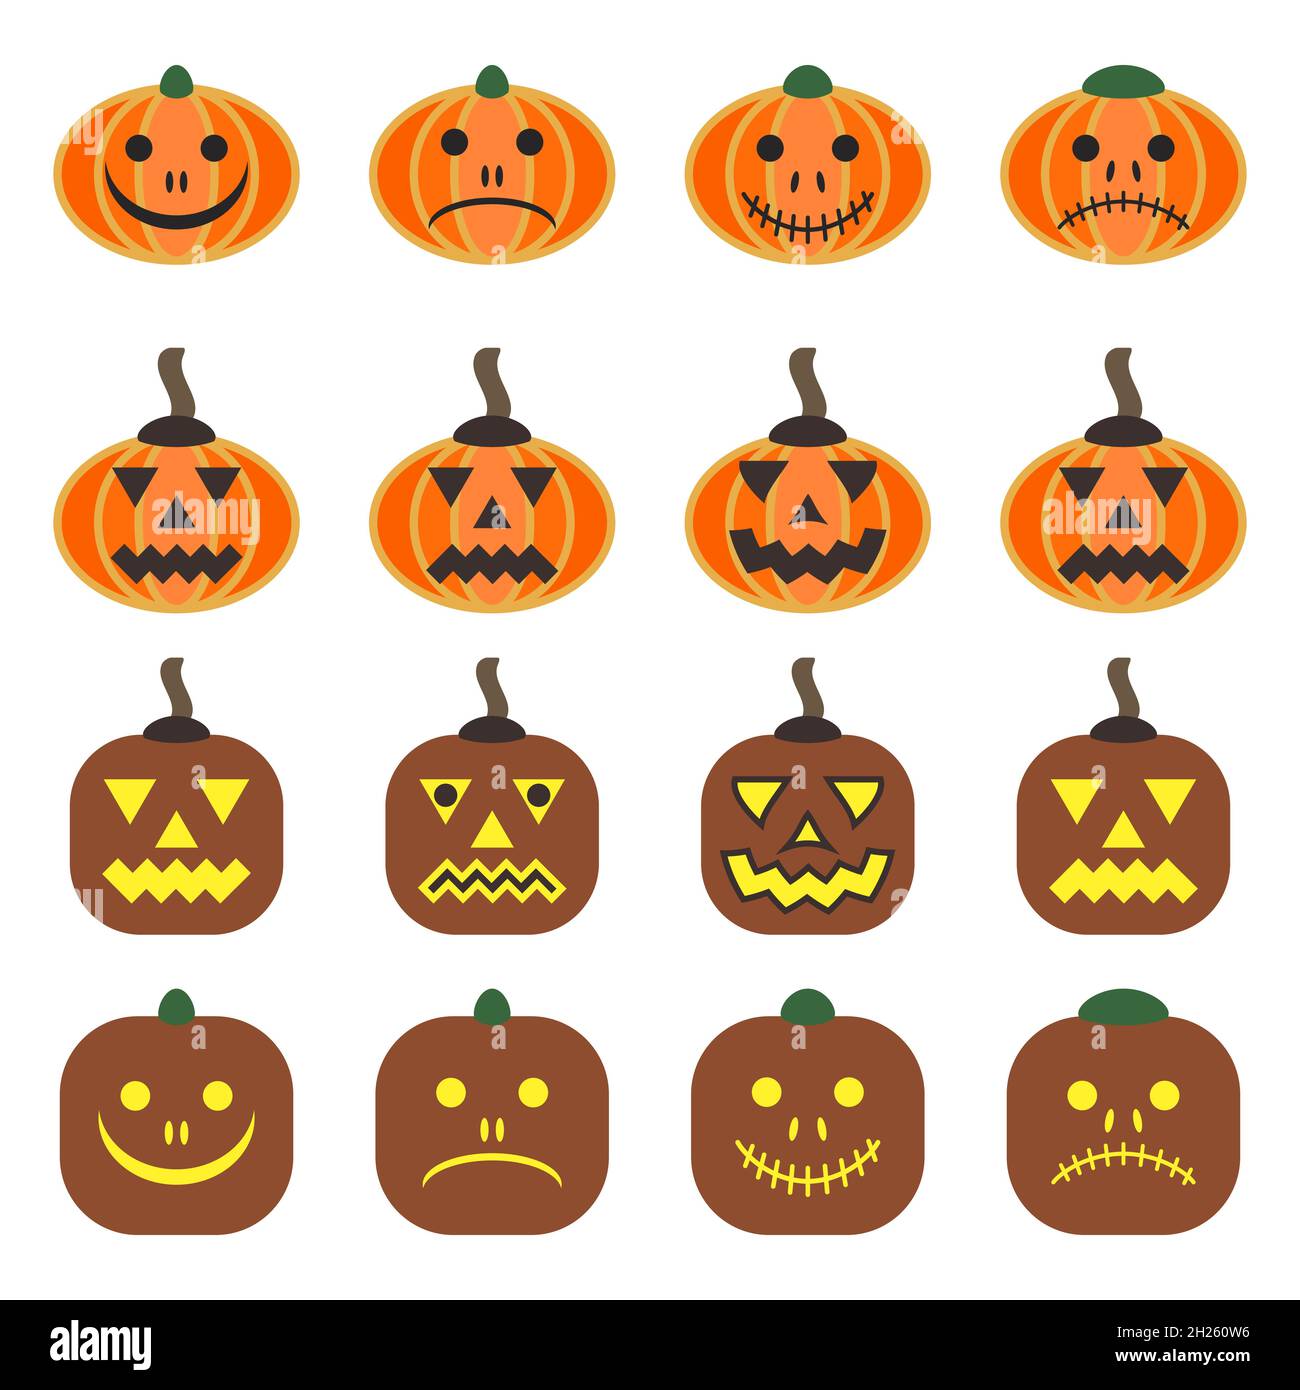 Halloween pumpkin set. Vector flat 16 icons. Emotions variations. Vegetable graphic icons with happy and scary smiles. Merry and sad grimaces. Cartoon Stock Vector